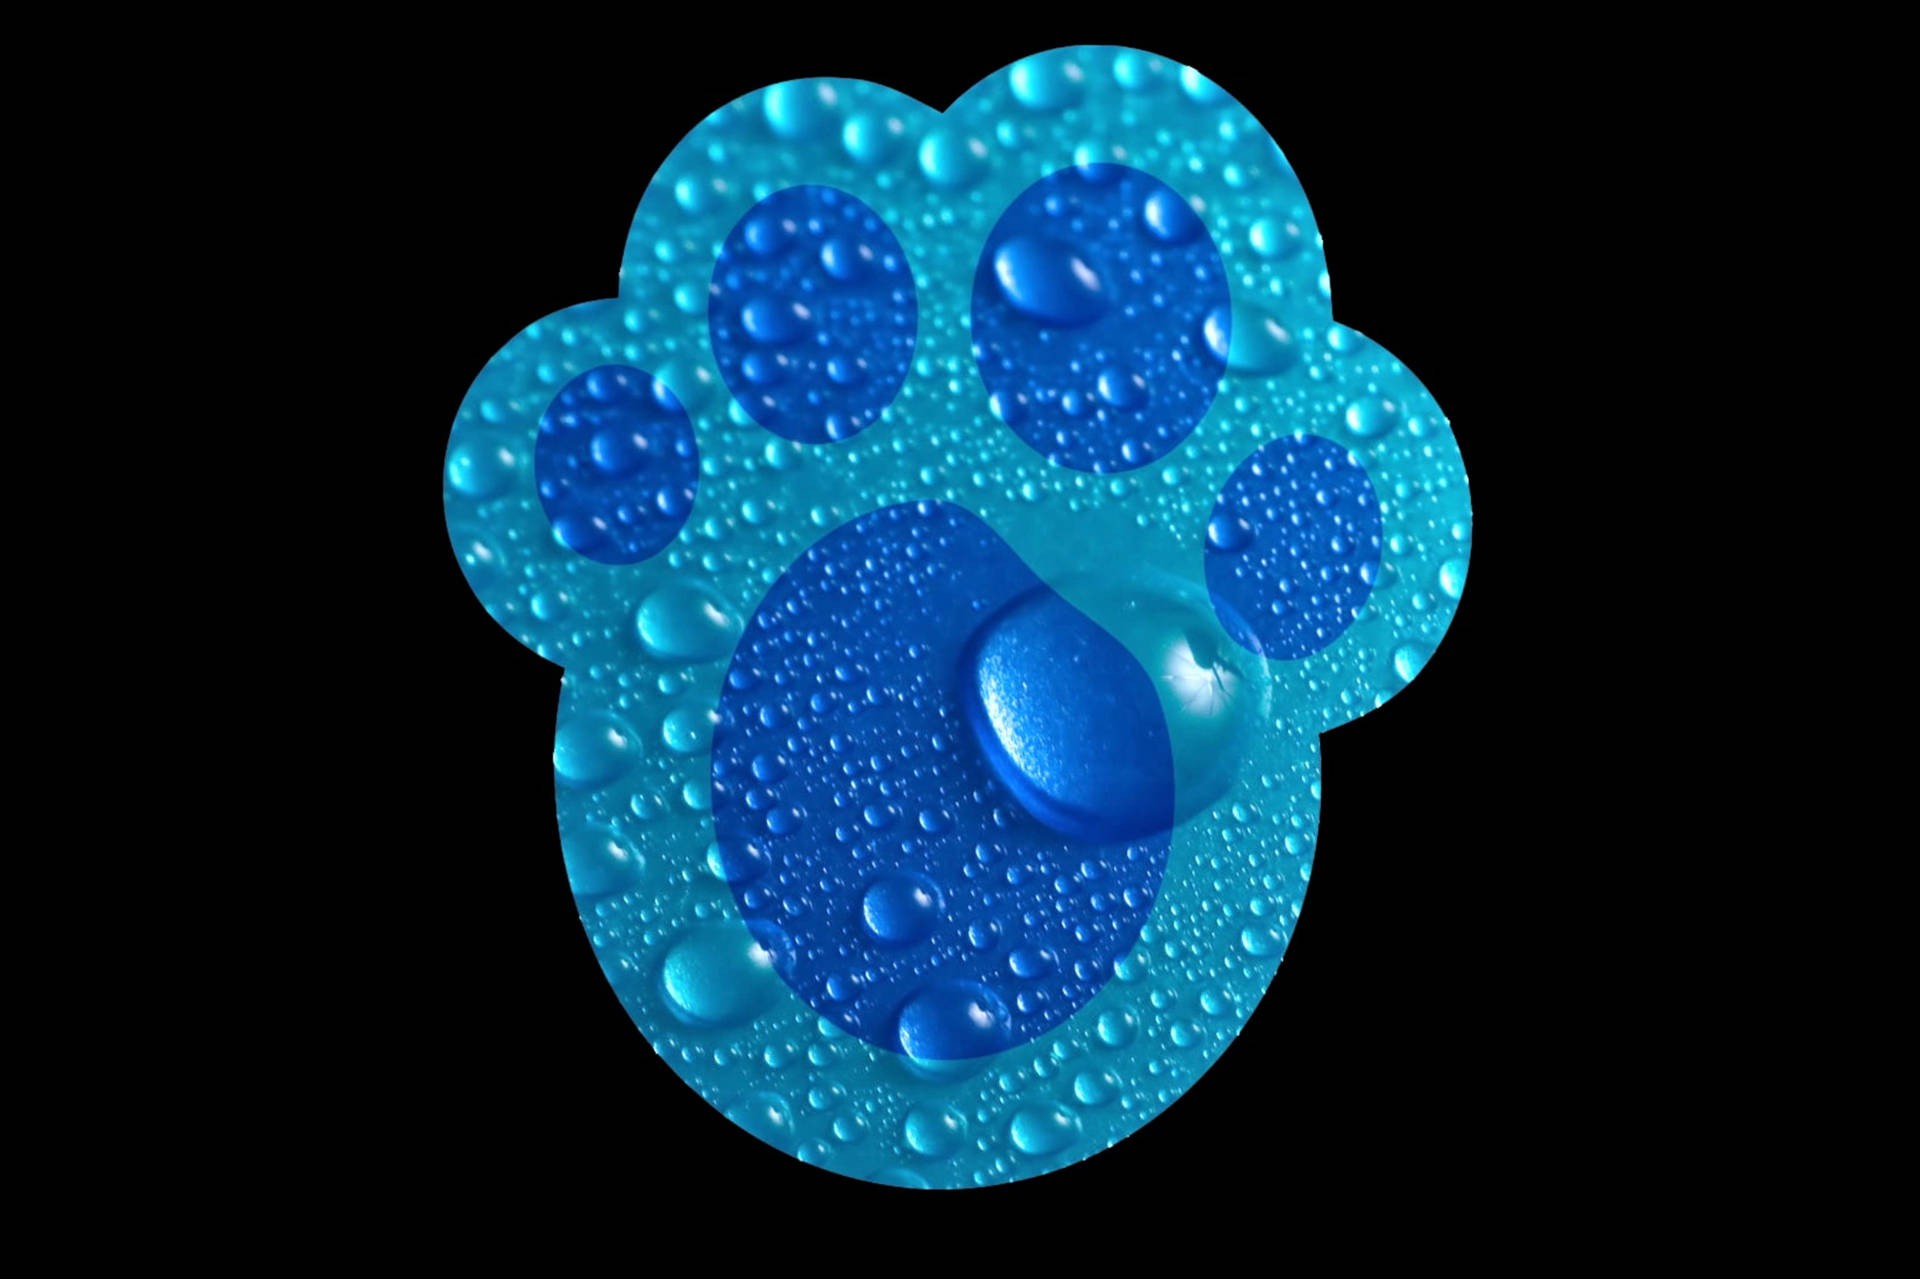 Blue Paw Print With Droplets Wallpaper